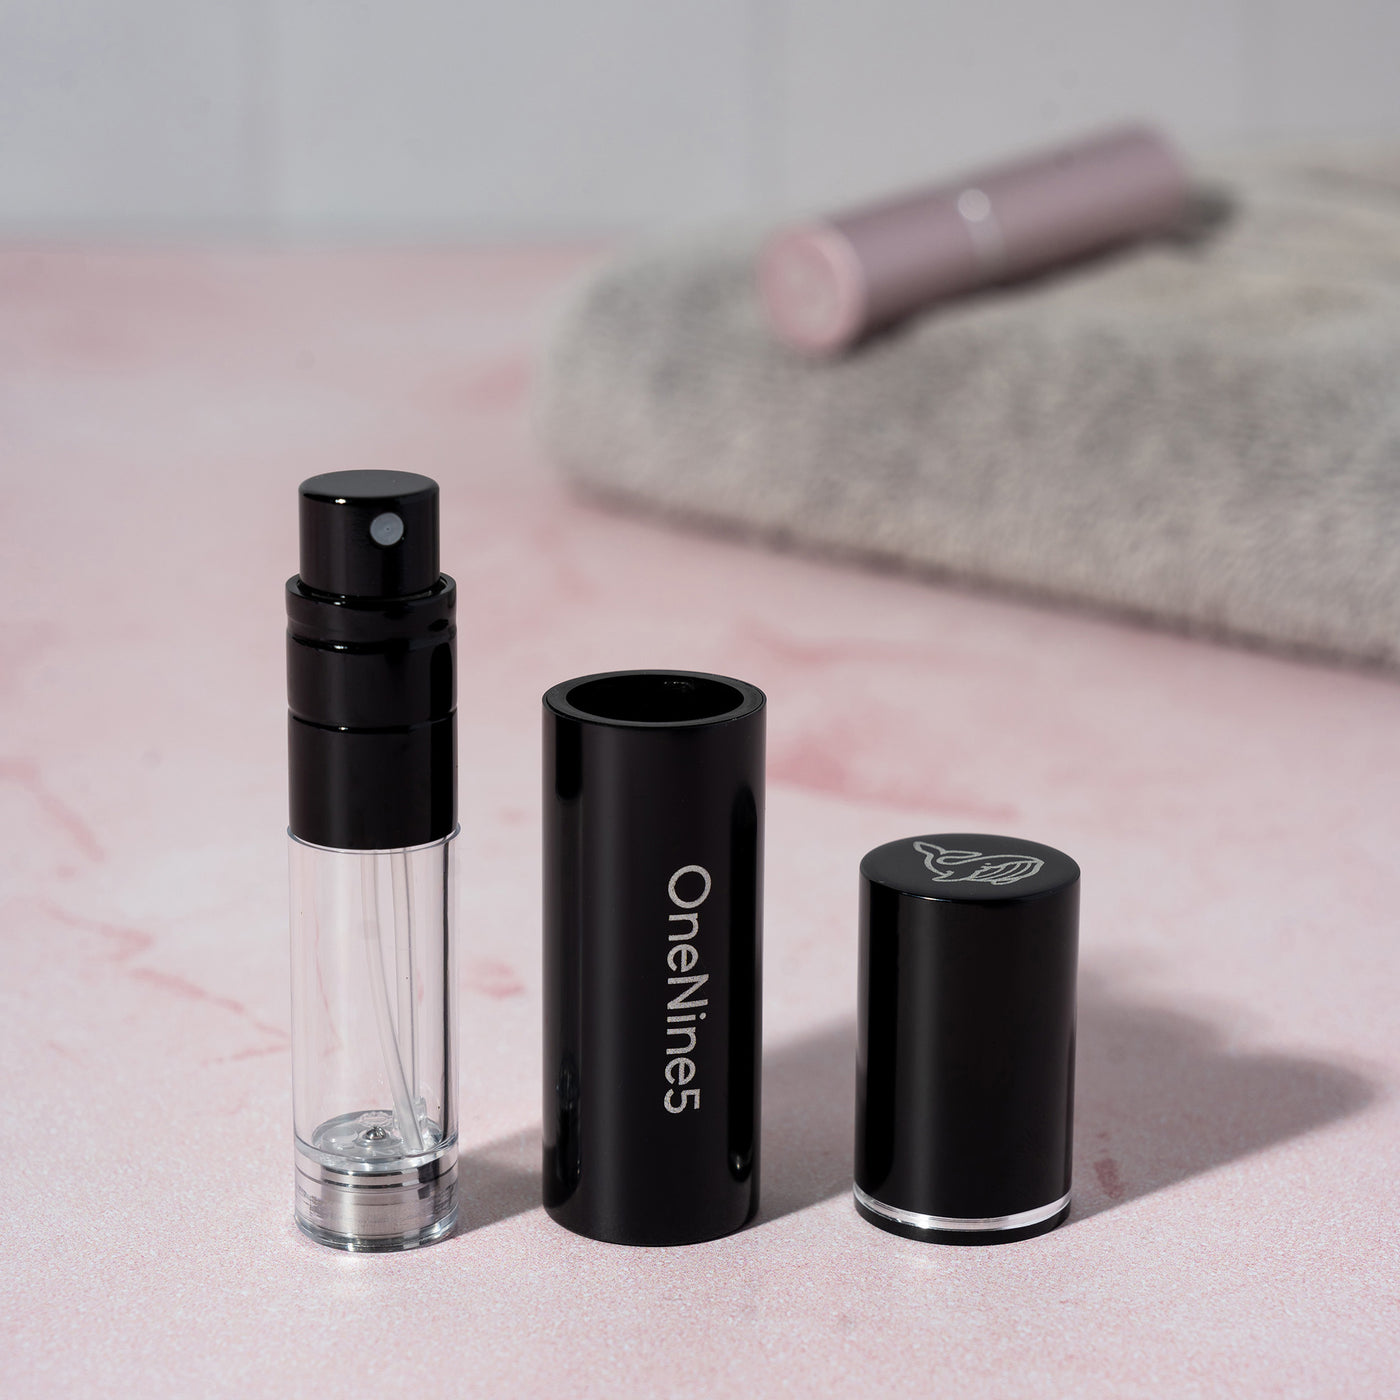 The 3 components of the black OneNine5 refillable fragrance bottle - the images shows the pump, case and magnetic lid in line. A pink bottle and towel is blurred in the background